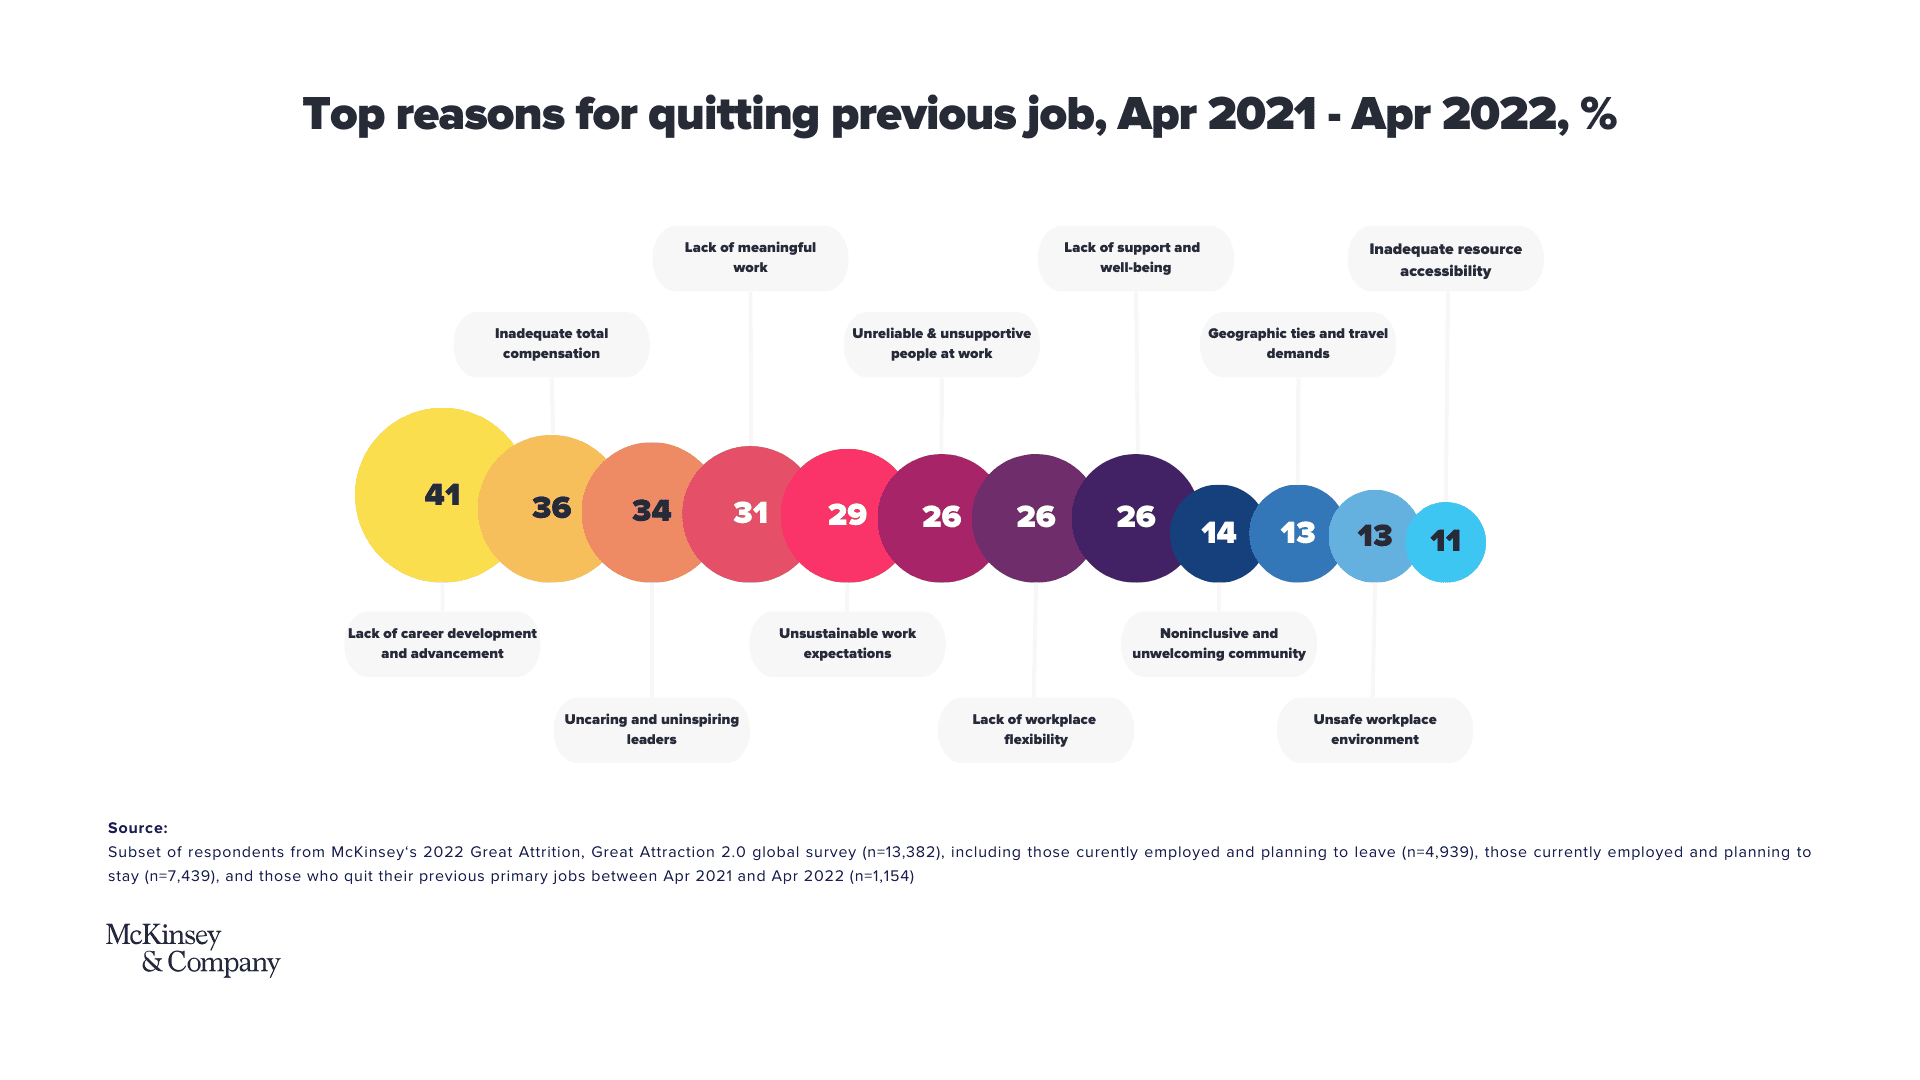 chart with the top reasons for quitting previous job by McKinsey & Co